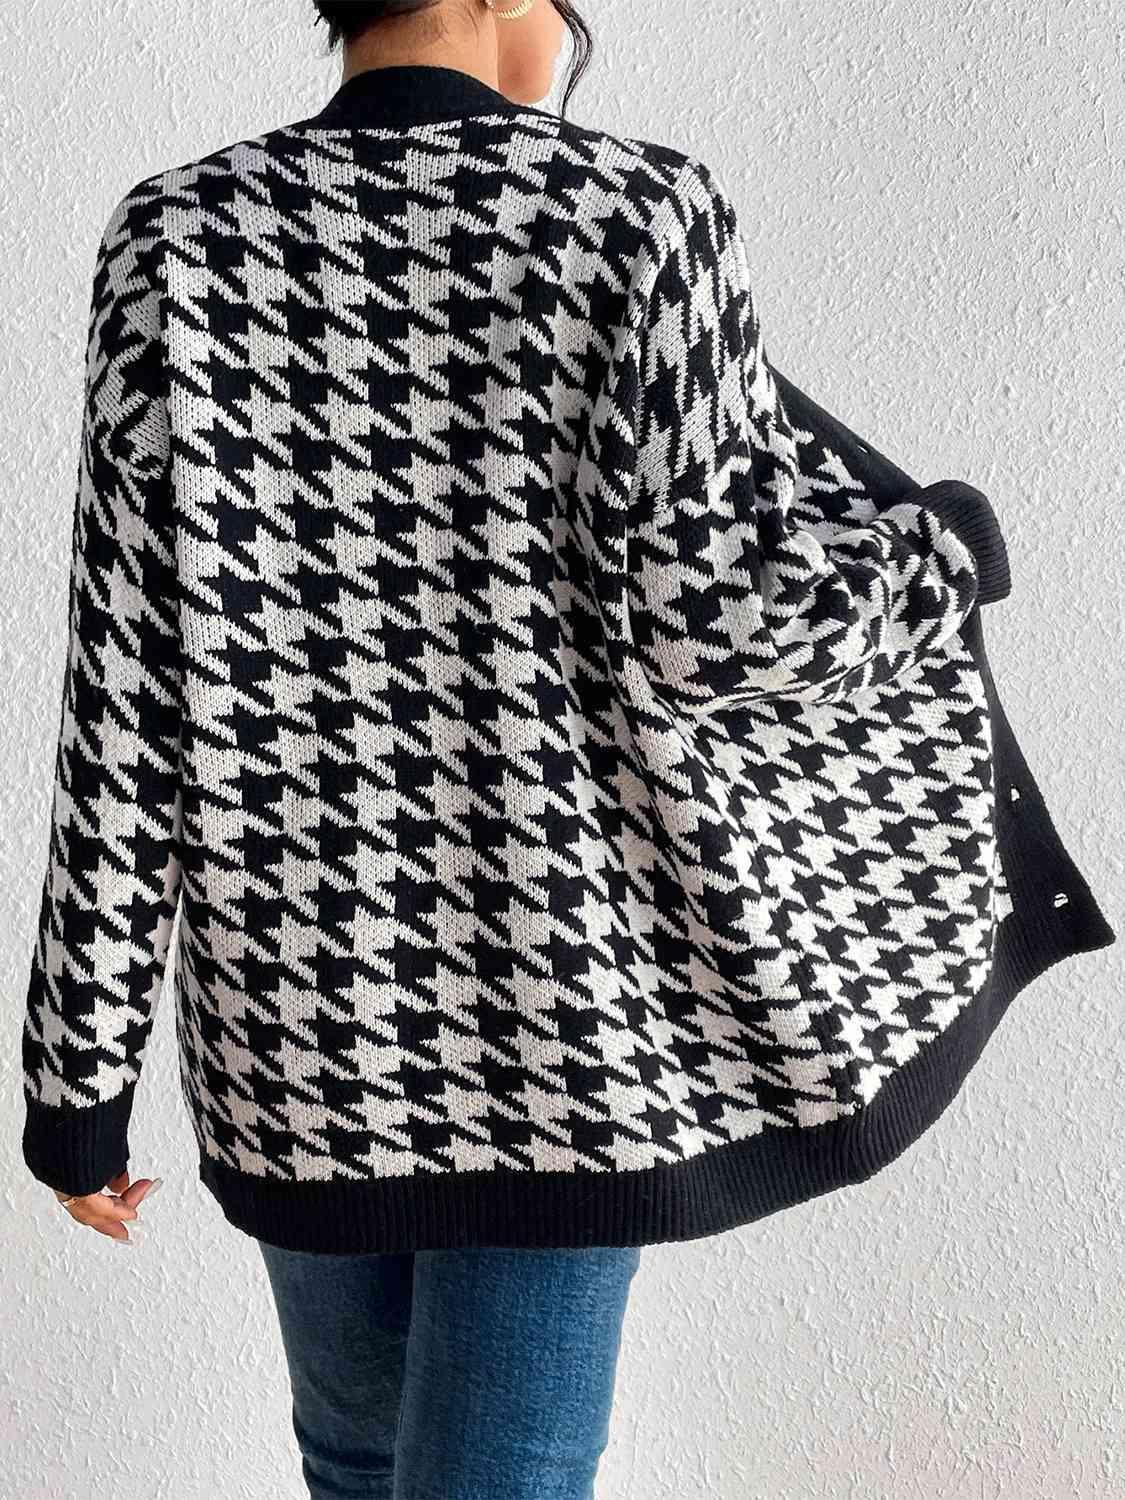 Ageless Style Button Up Houndstooth Cardigan-MXSTUDIO.COM